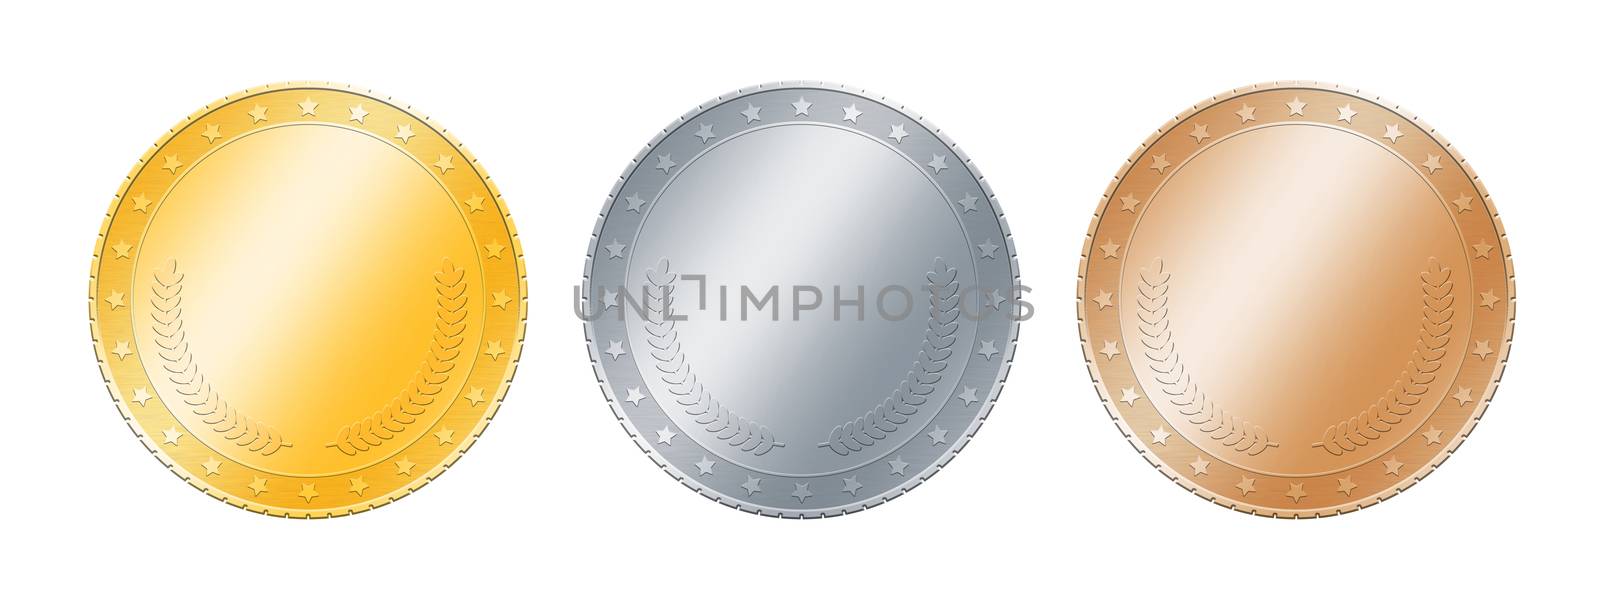 Gold, silver, bronze coins or medals over white by BreakingTheWalls